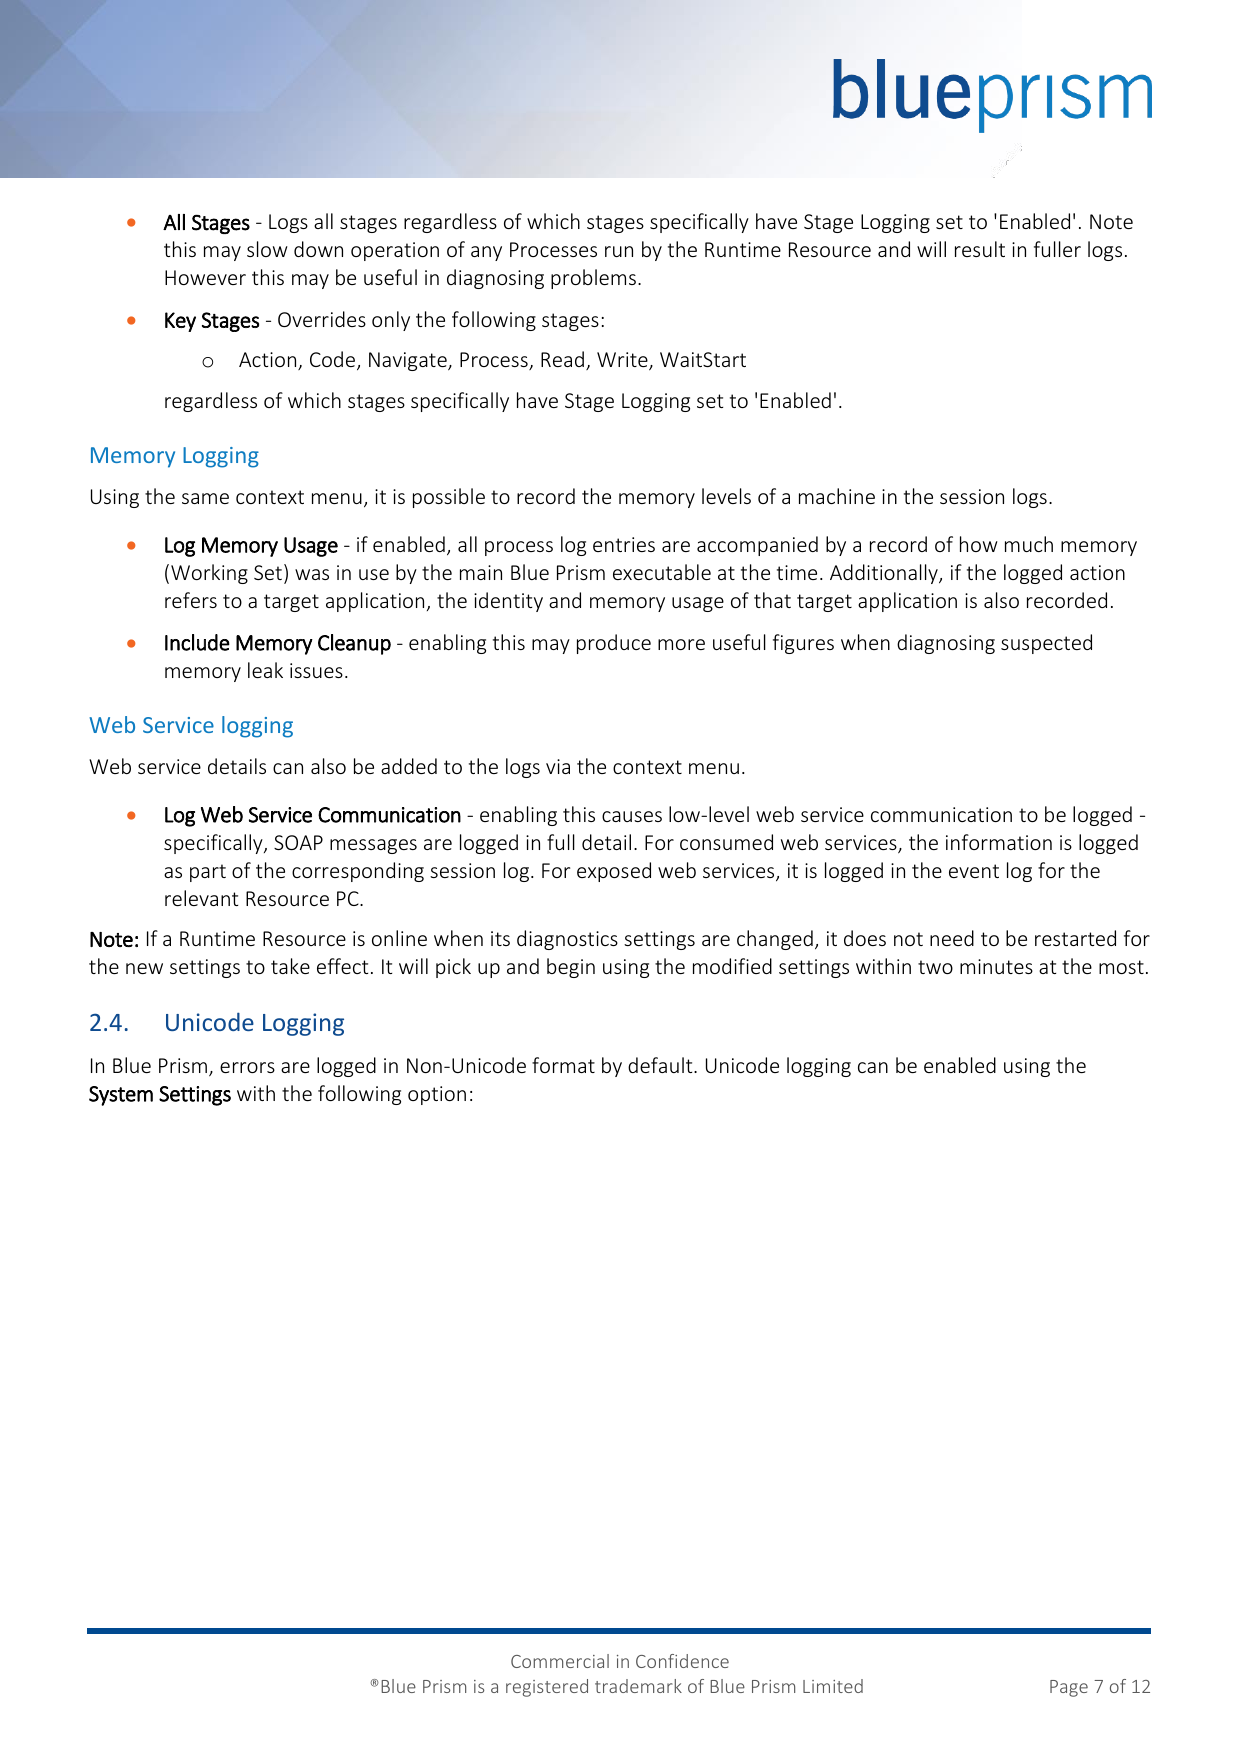 Page 7 of 12 - Blue Prism Logging Best Practices Guide